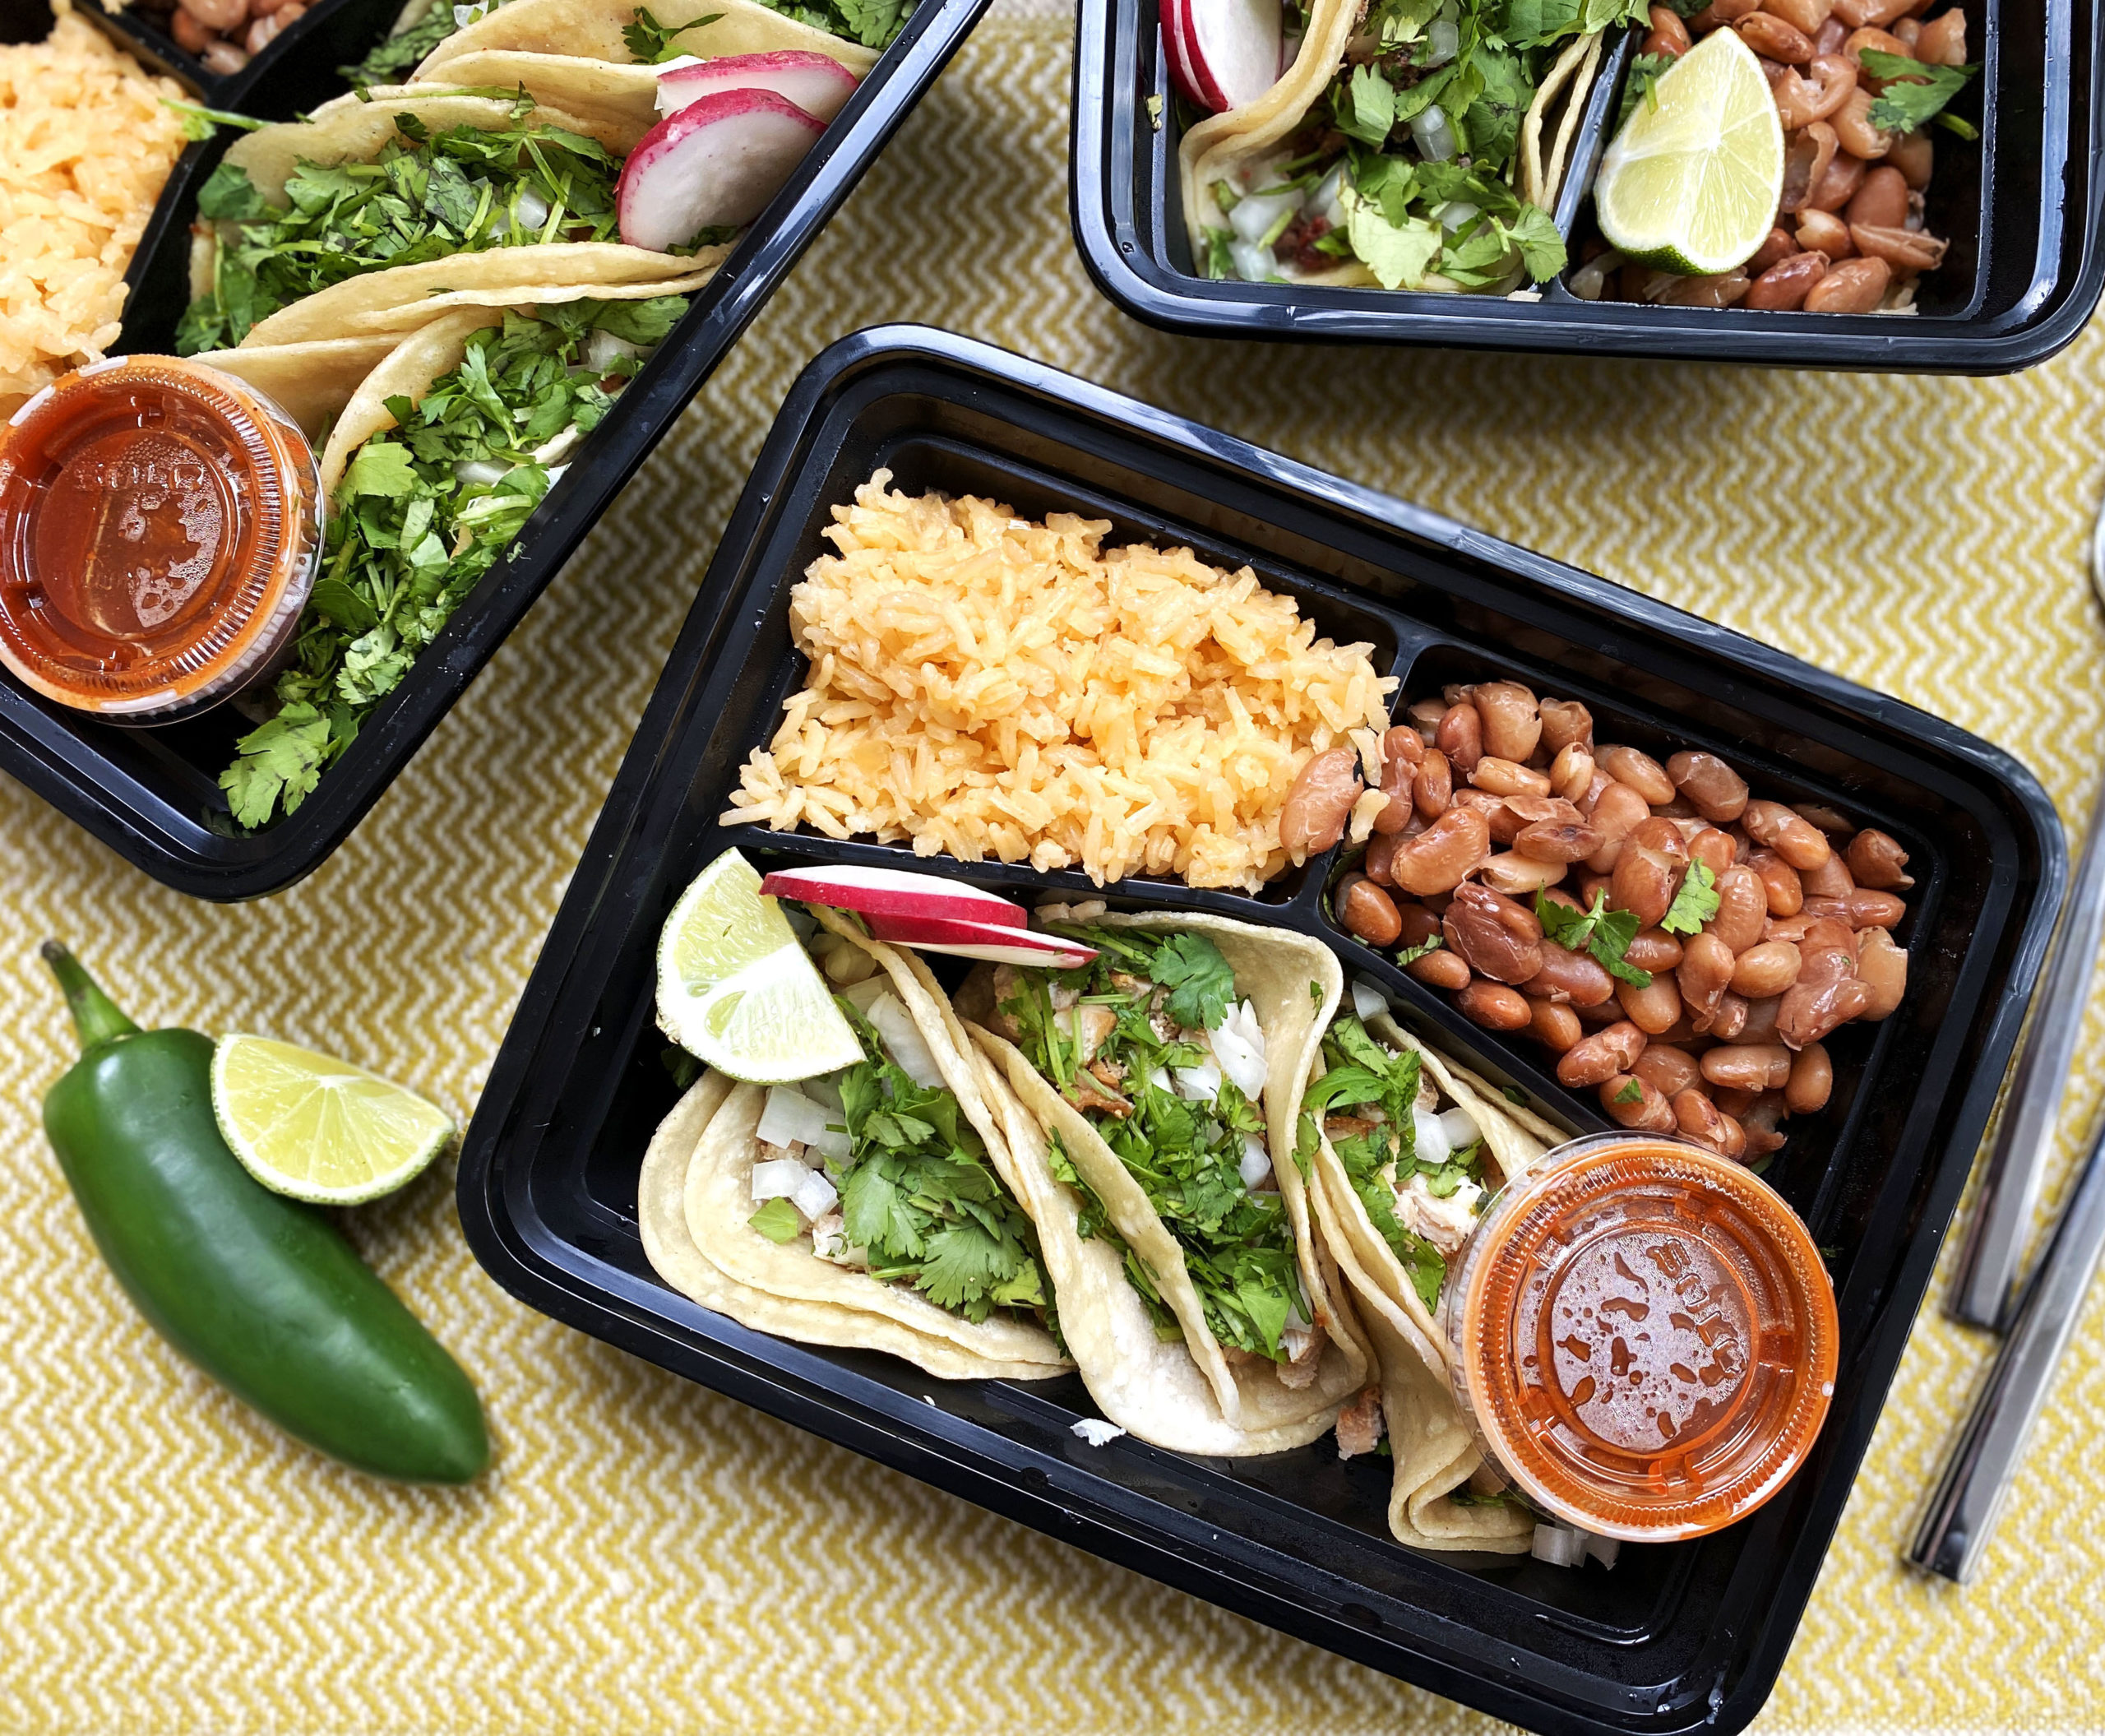 https://www.lishfood.com/wp-content/uploads/2020/05/BoxnBar_tacos_boxed_lunch-scaled.jpg